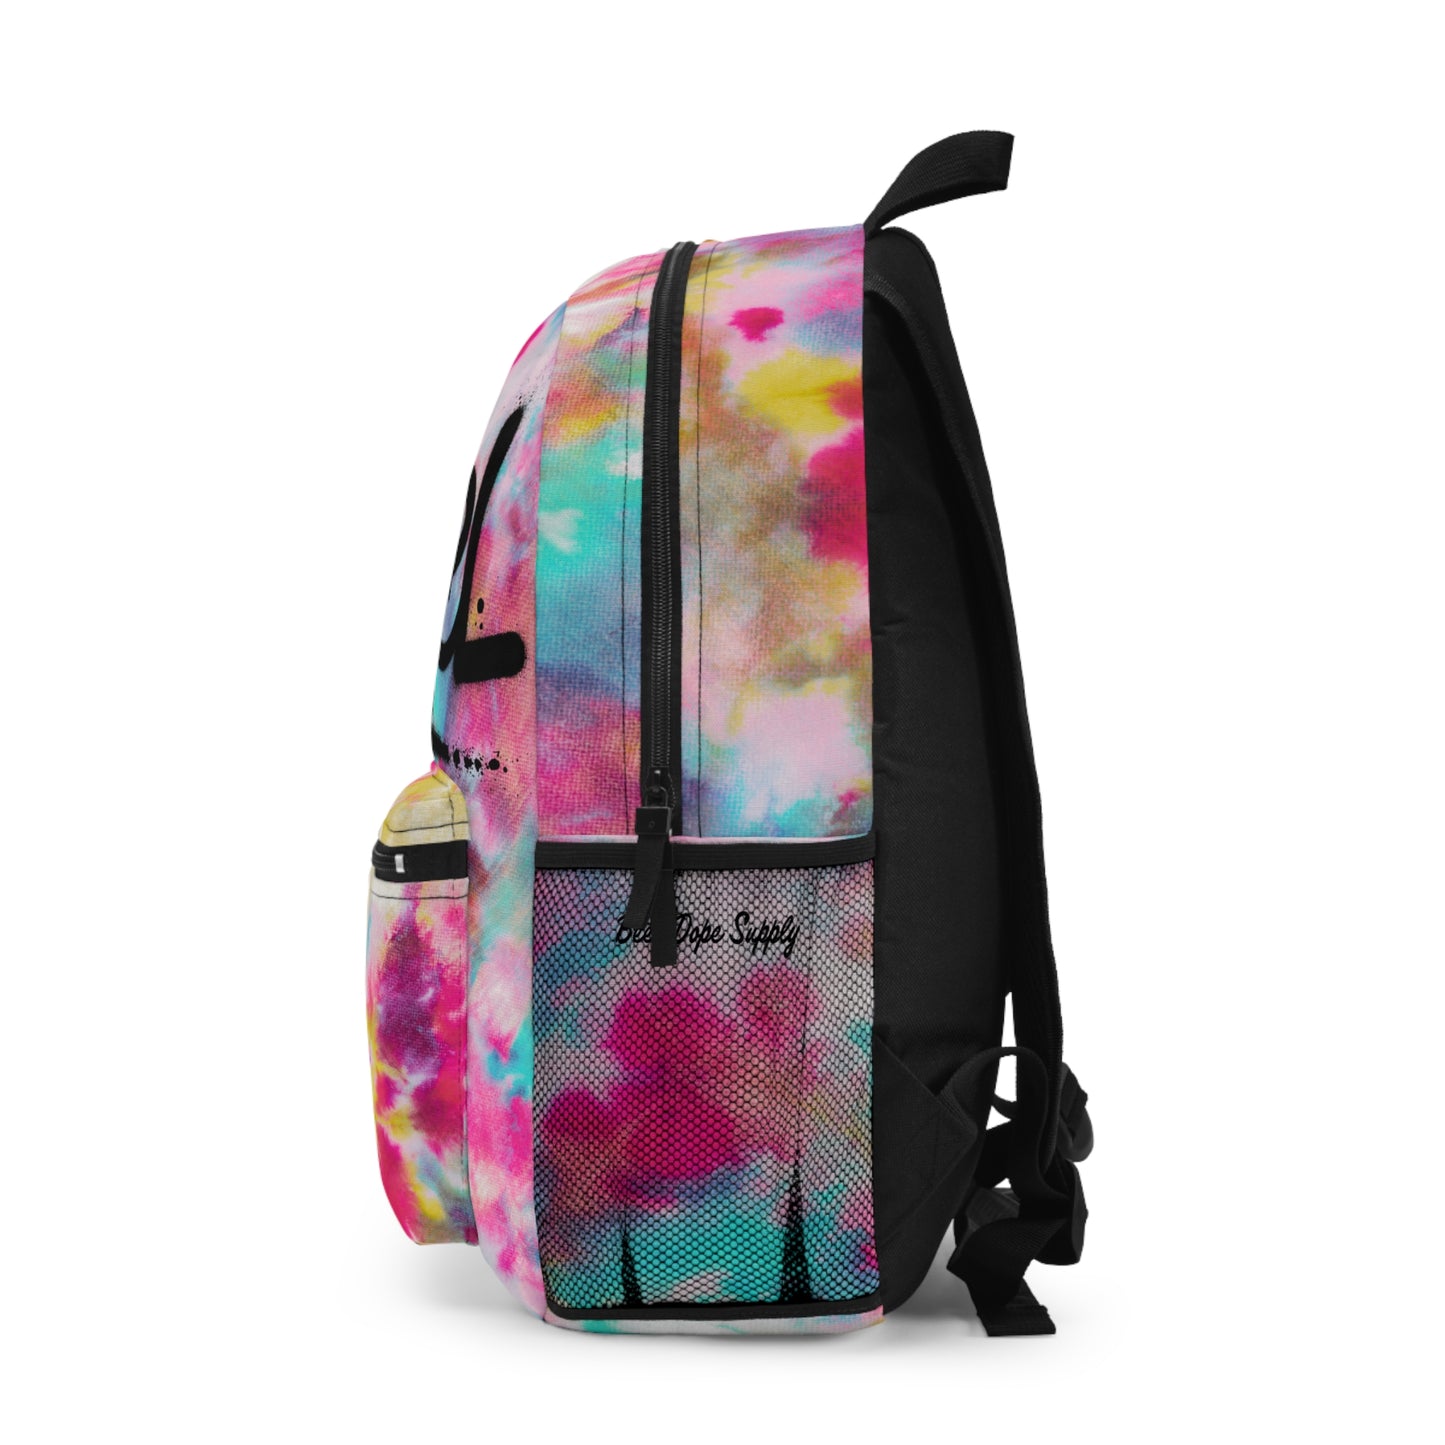 Savage x Pink Backpack - Been Dope Supply